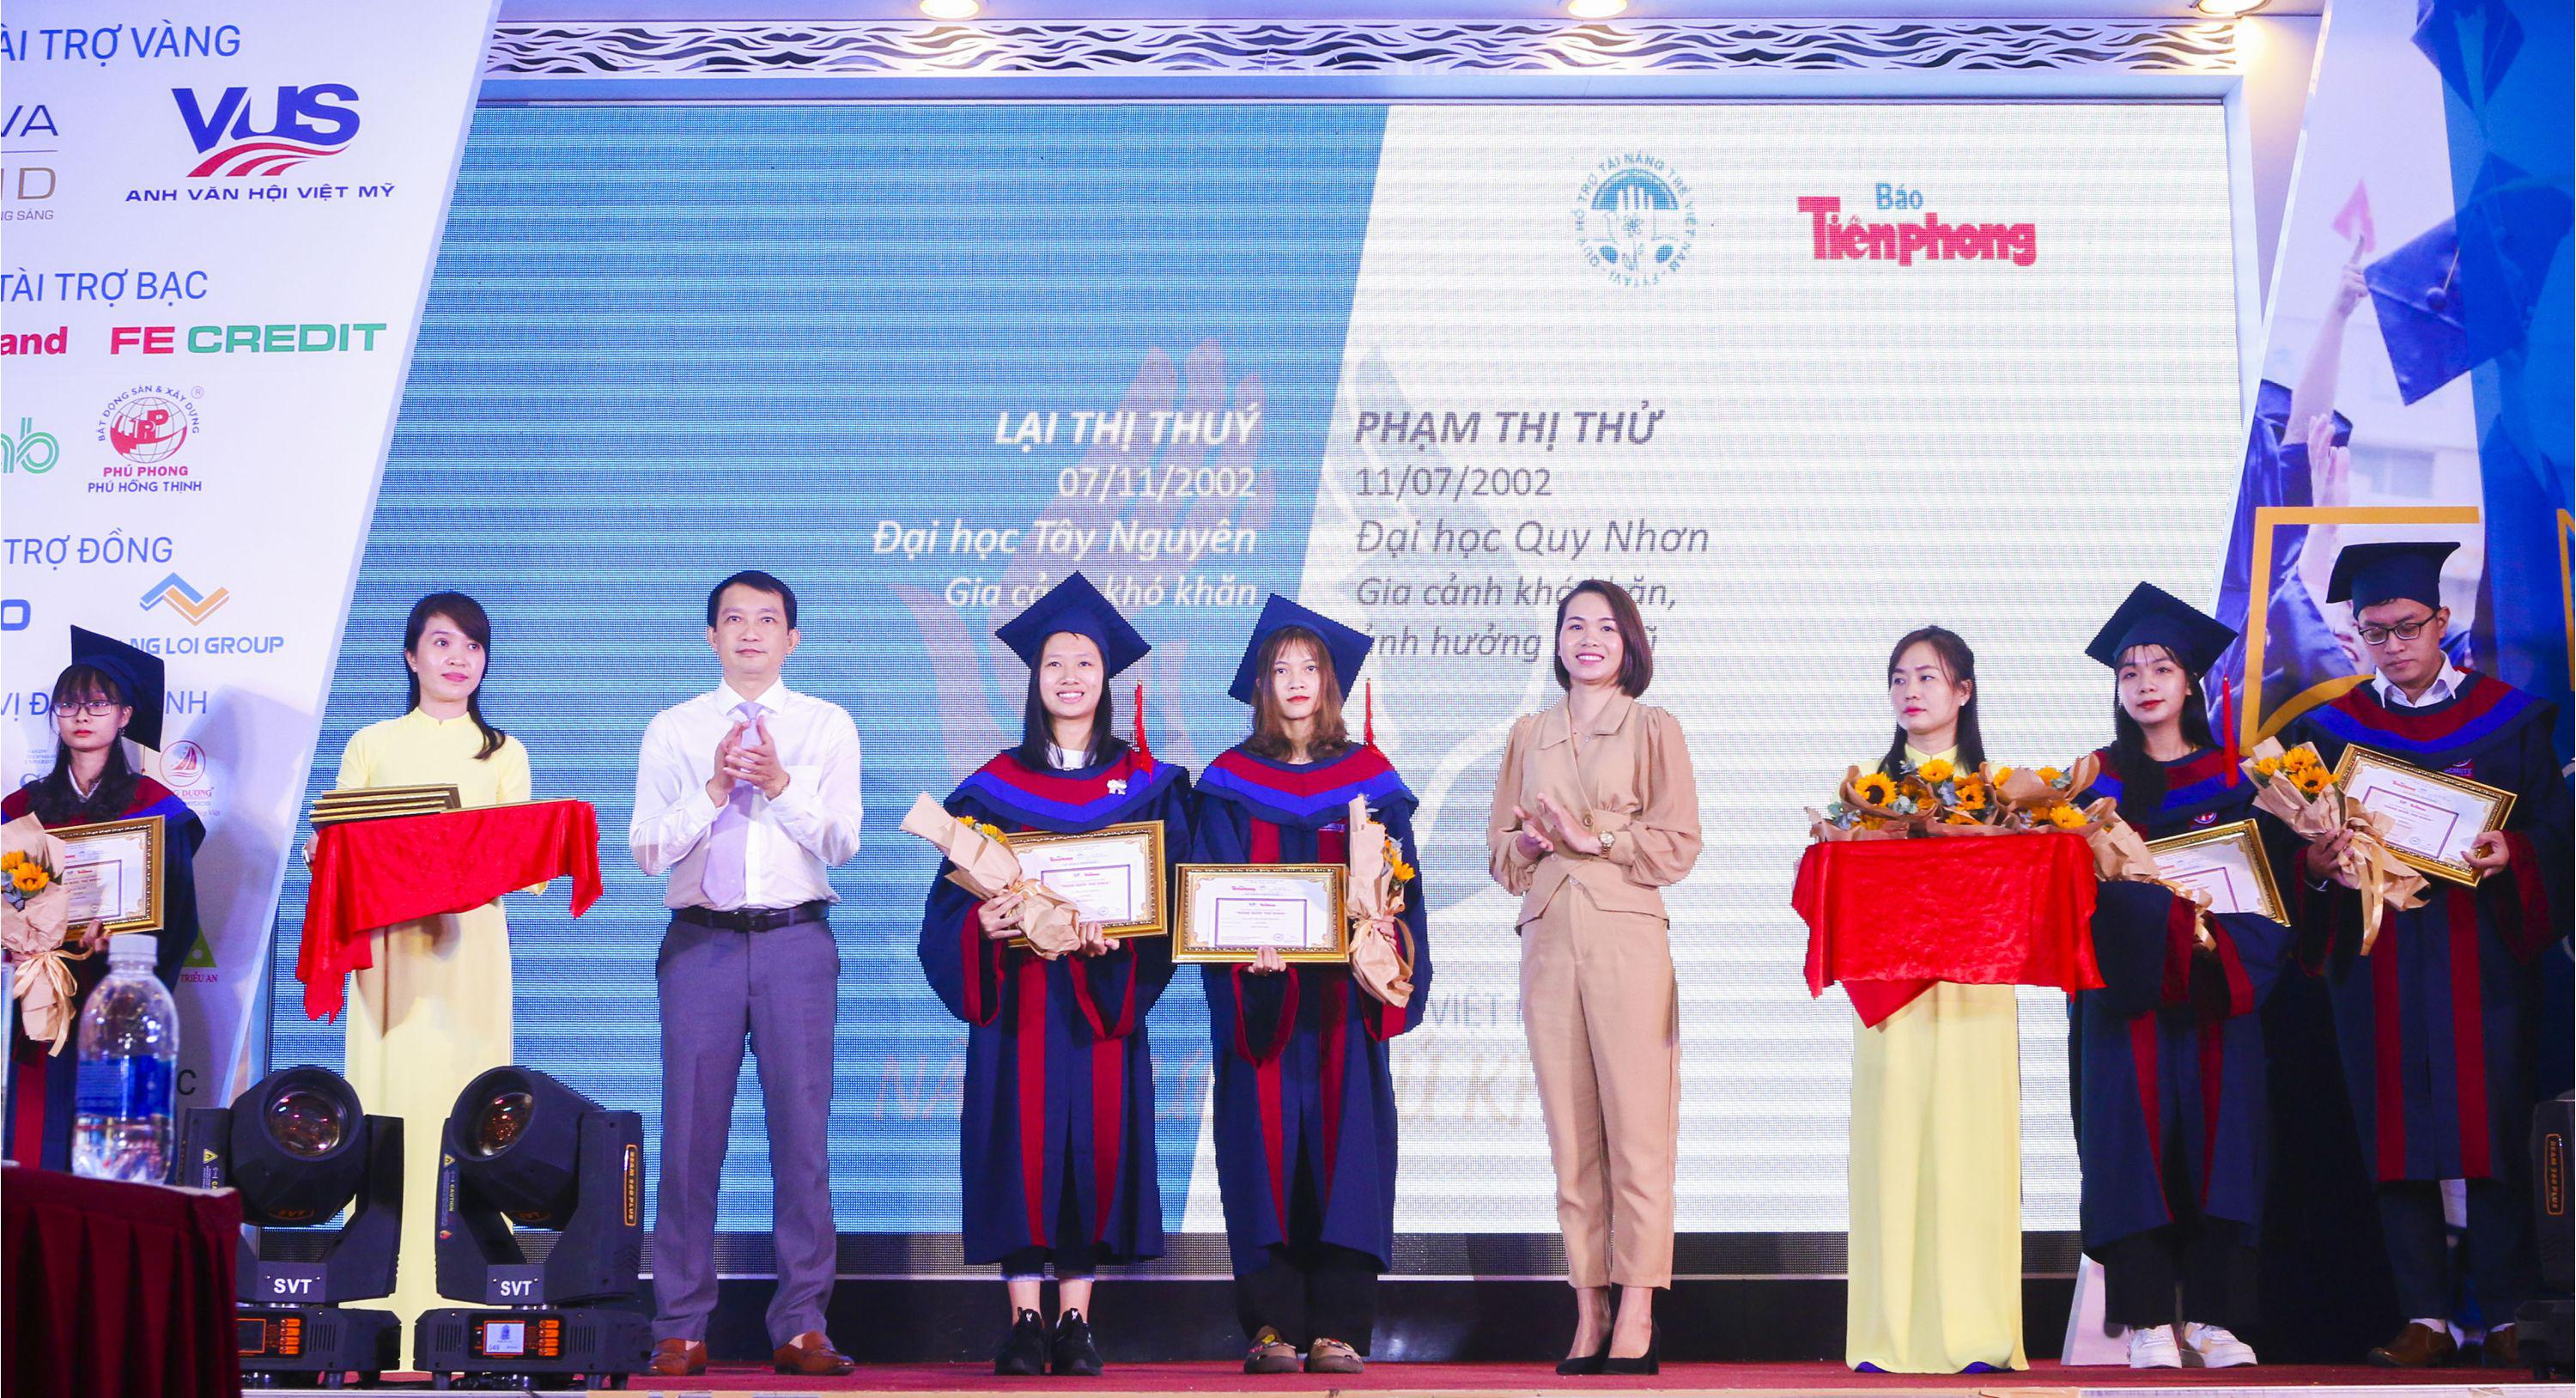 Thang Loi Group awarded scholarships to 24 valedictorians in Construction and Real Estate